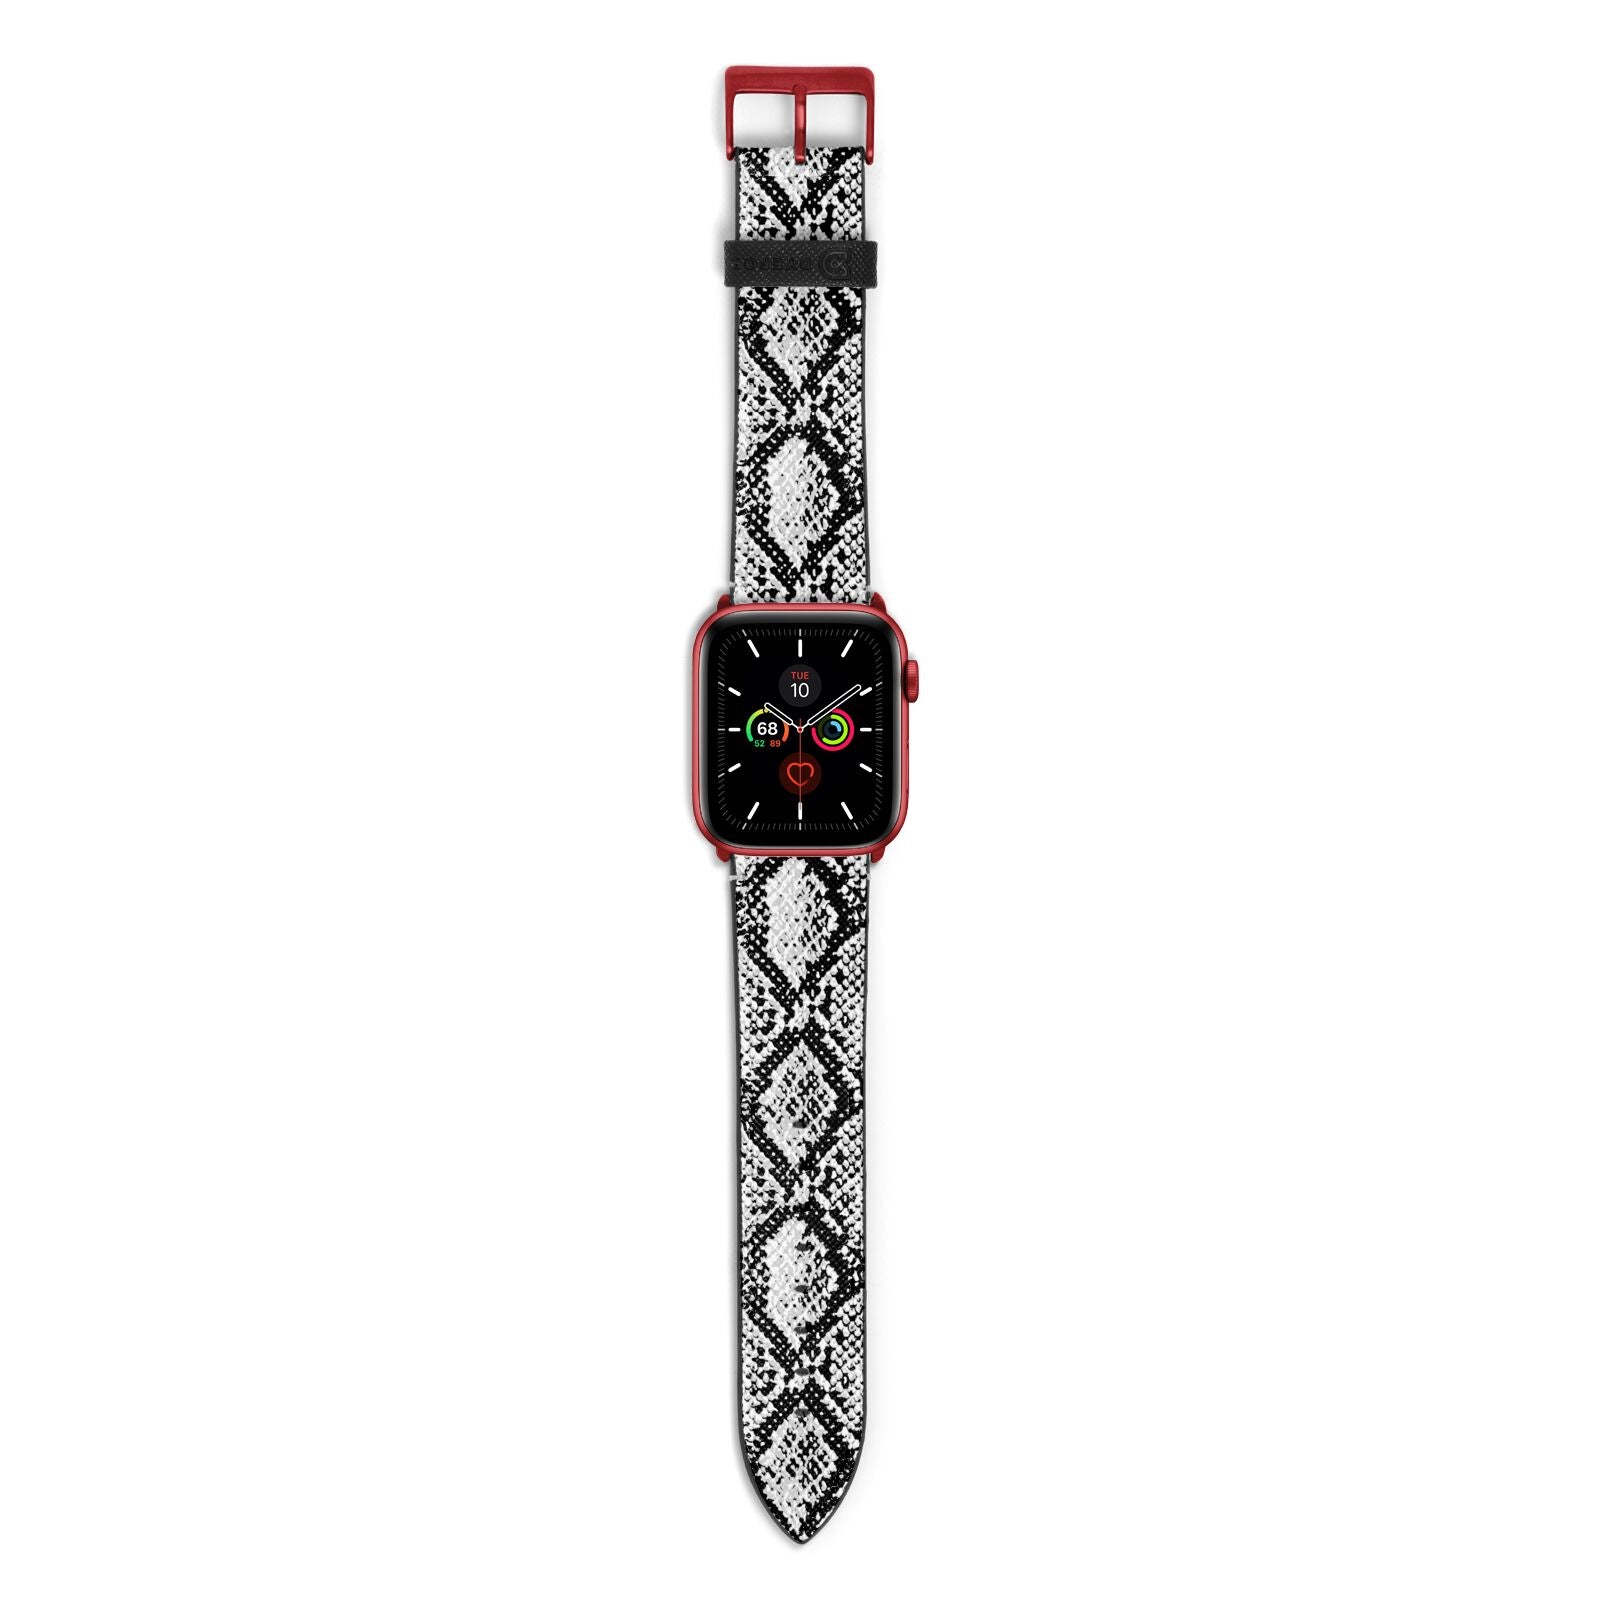 Black Snakeskin Apple Watch Strap with Red Hardware